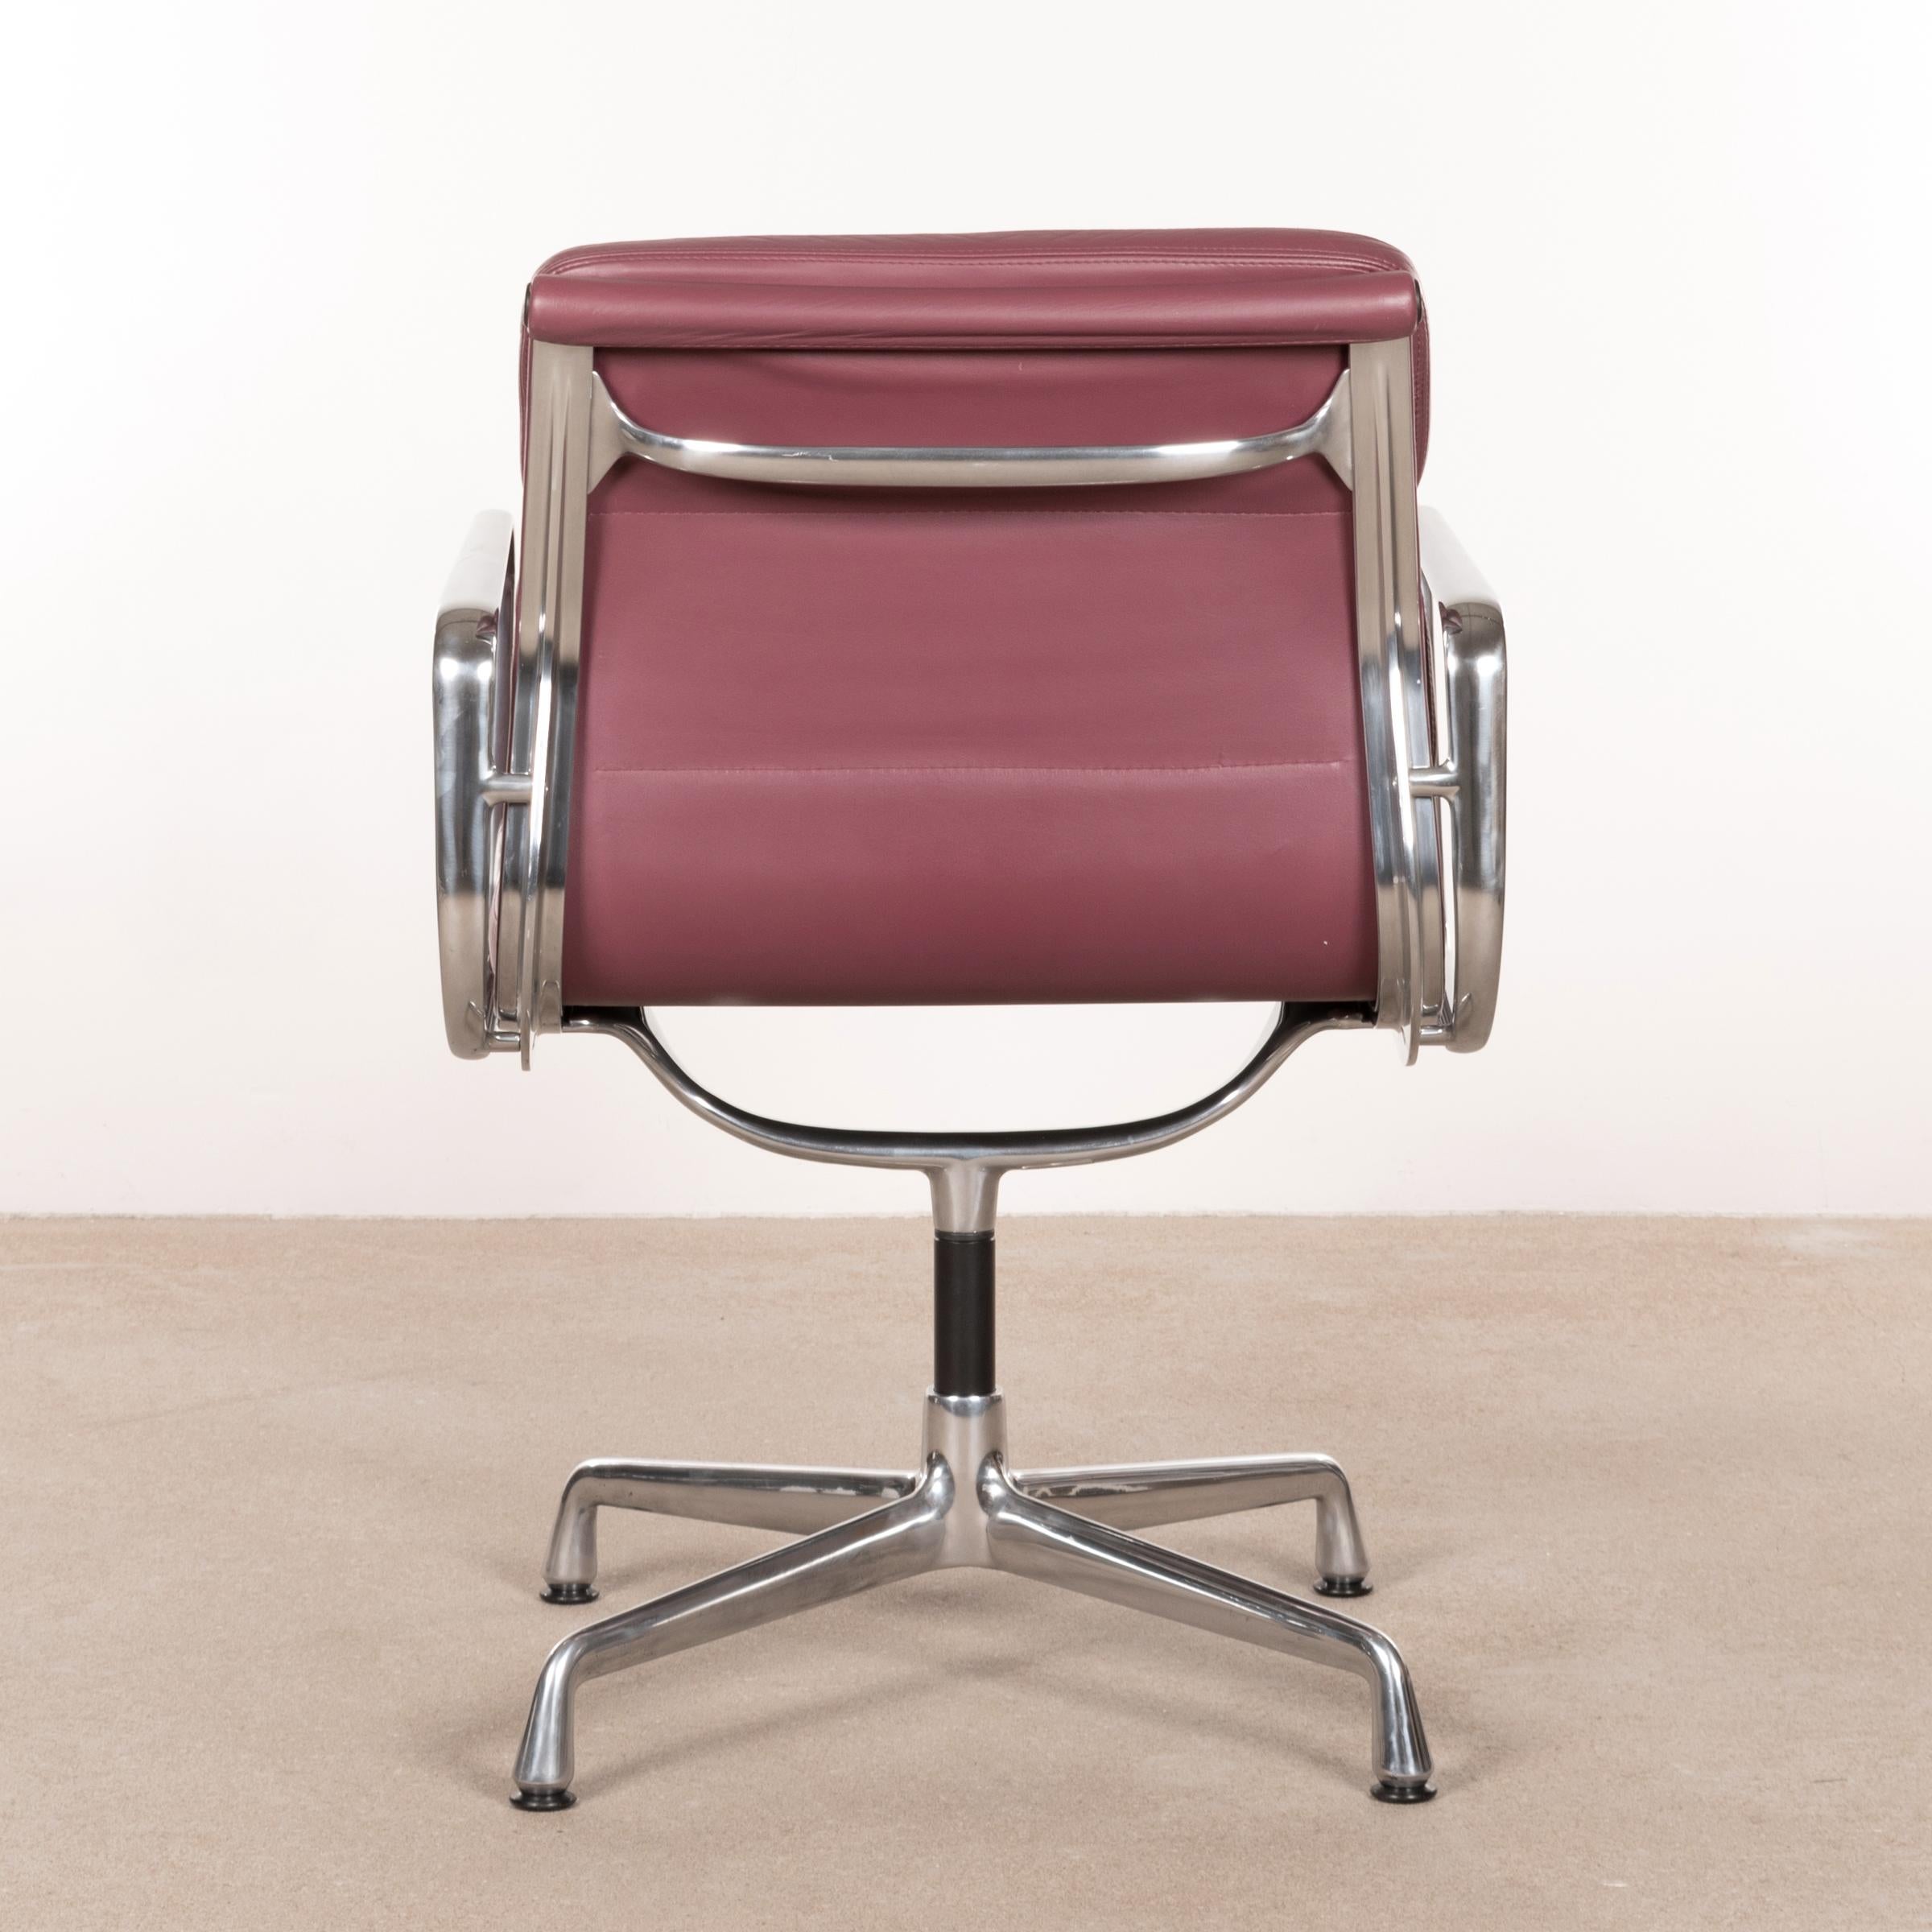 German Charles & Ray Eames EA208 Soft Pad Chairs in Aubergine / Purple Leather by Vitra